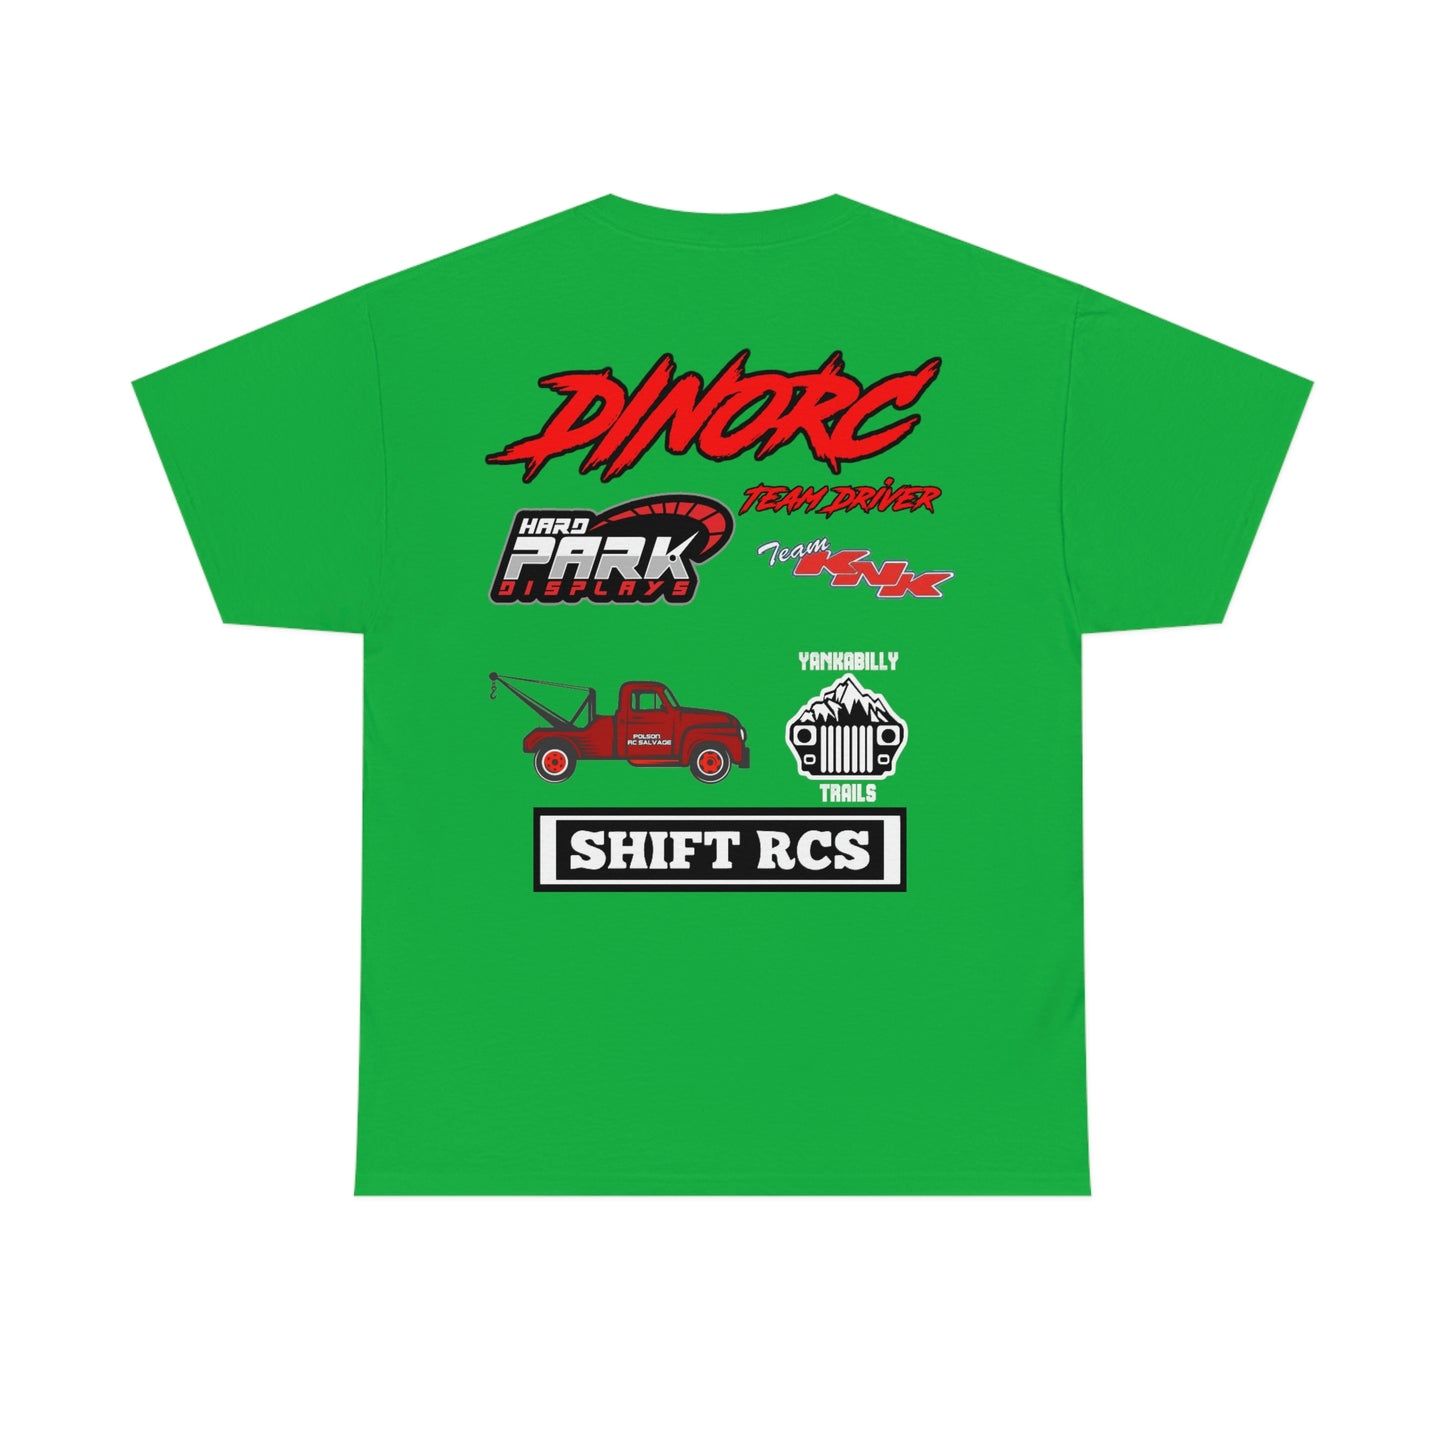 Team Driver Todd Sizelove truck logo Front and Back DinoRc Logo T-Shirt S-5x 5 colors